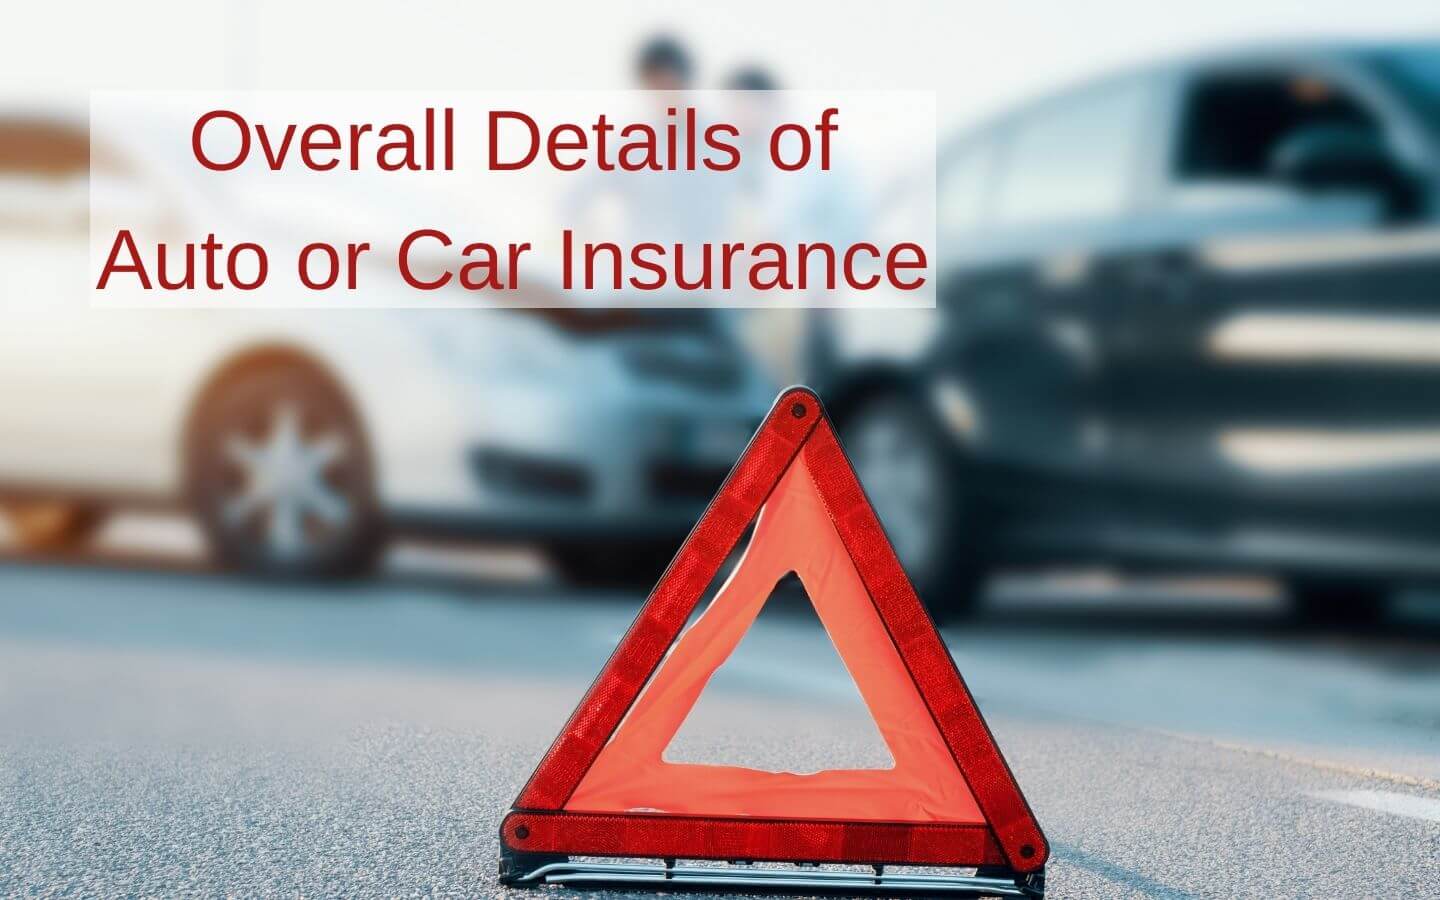 Overall Details of Auto or Car Insurance